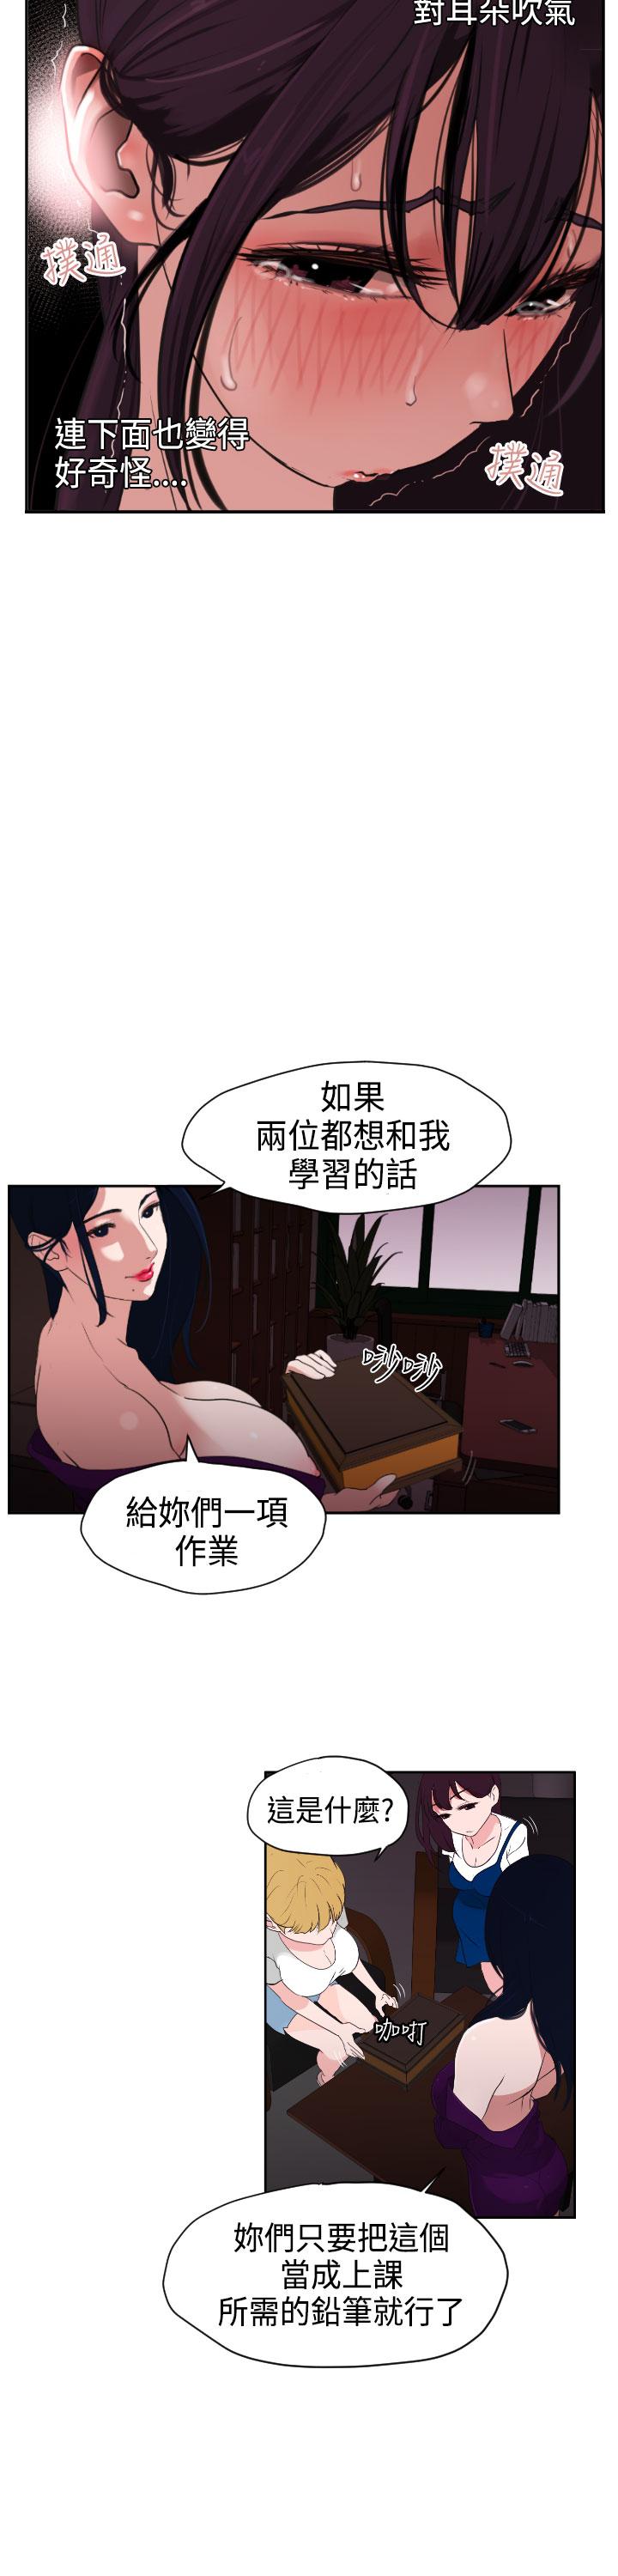 Desire King (慾求王) Ch.1-7 (chinese) 100